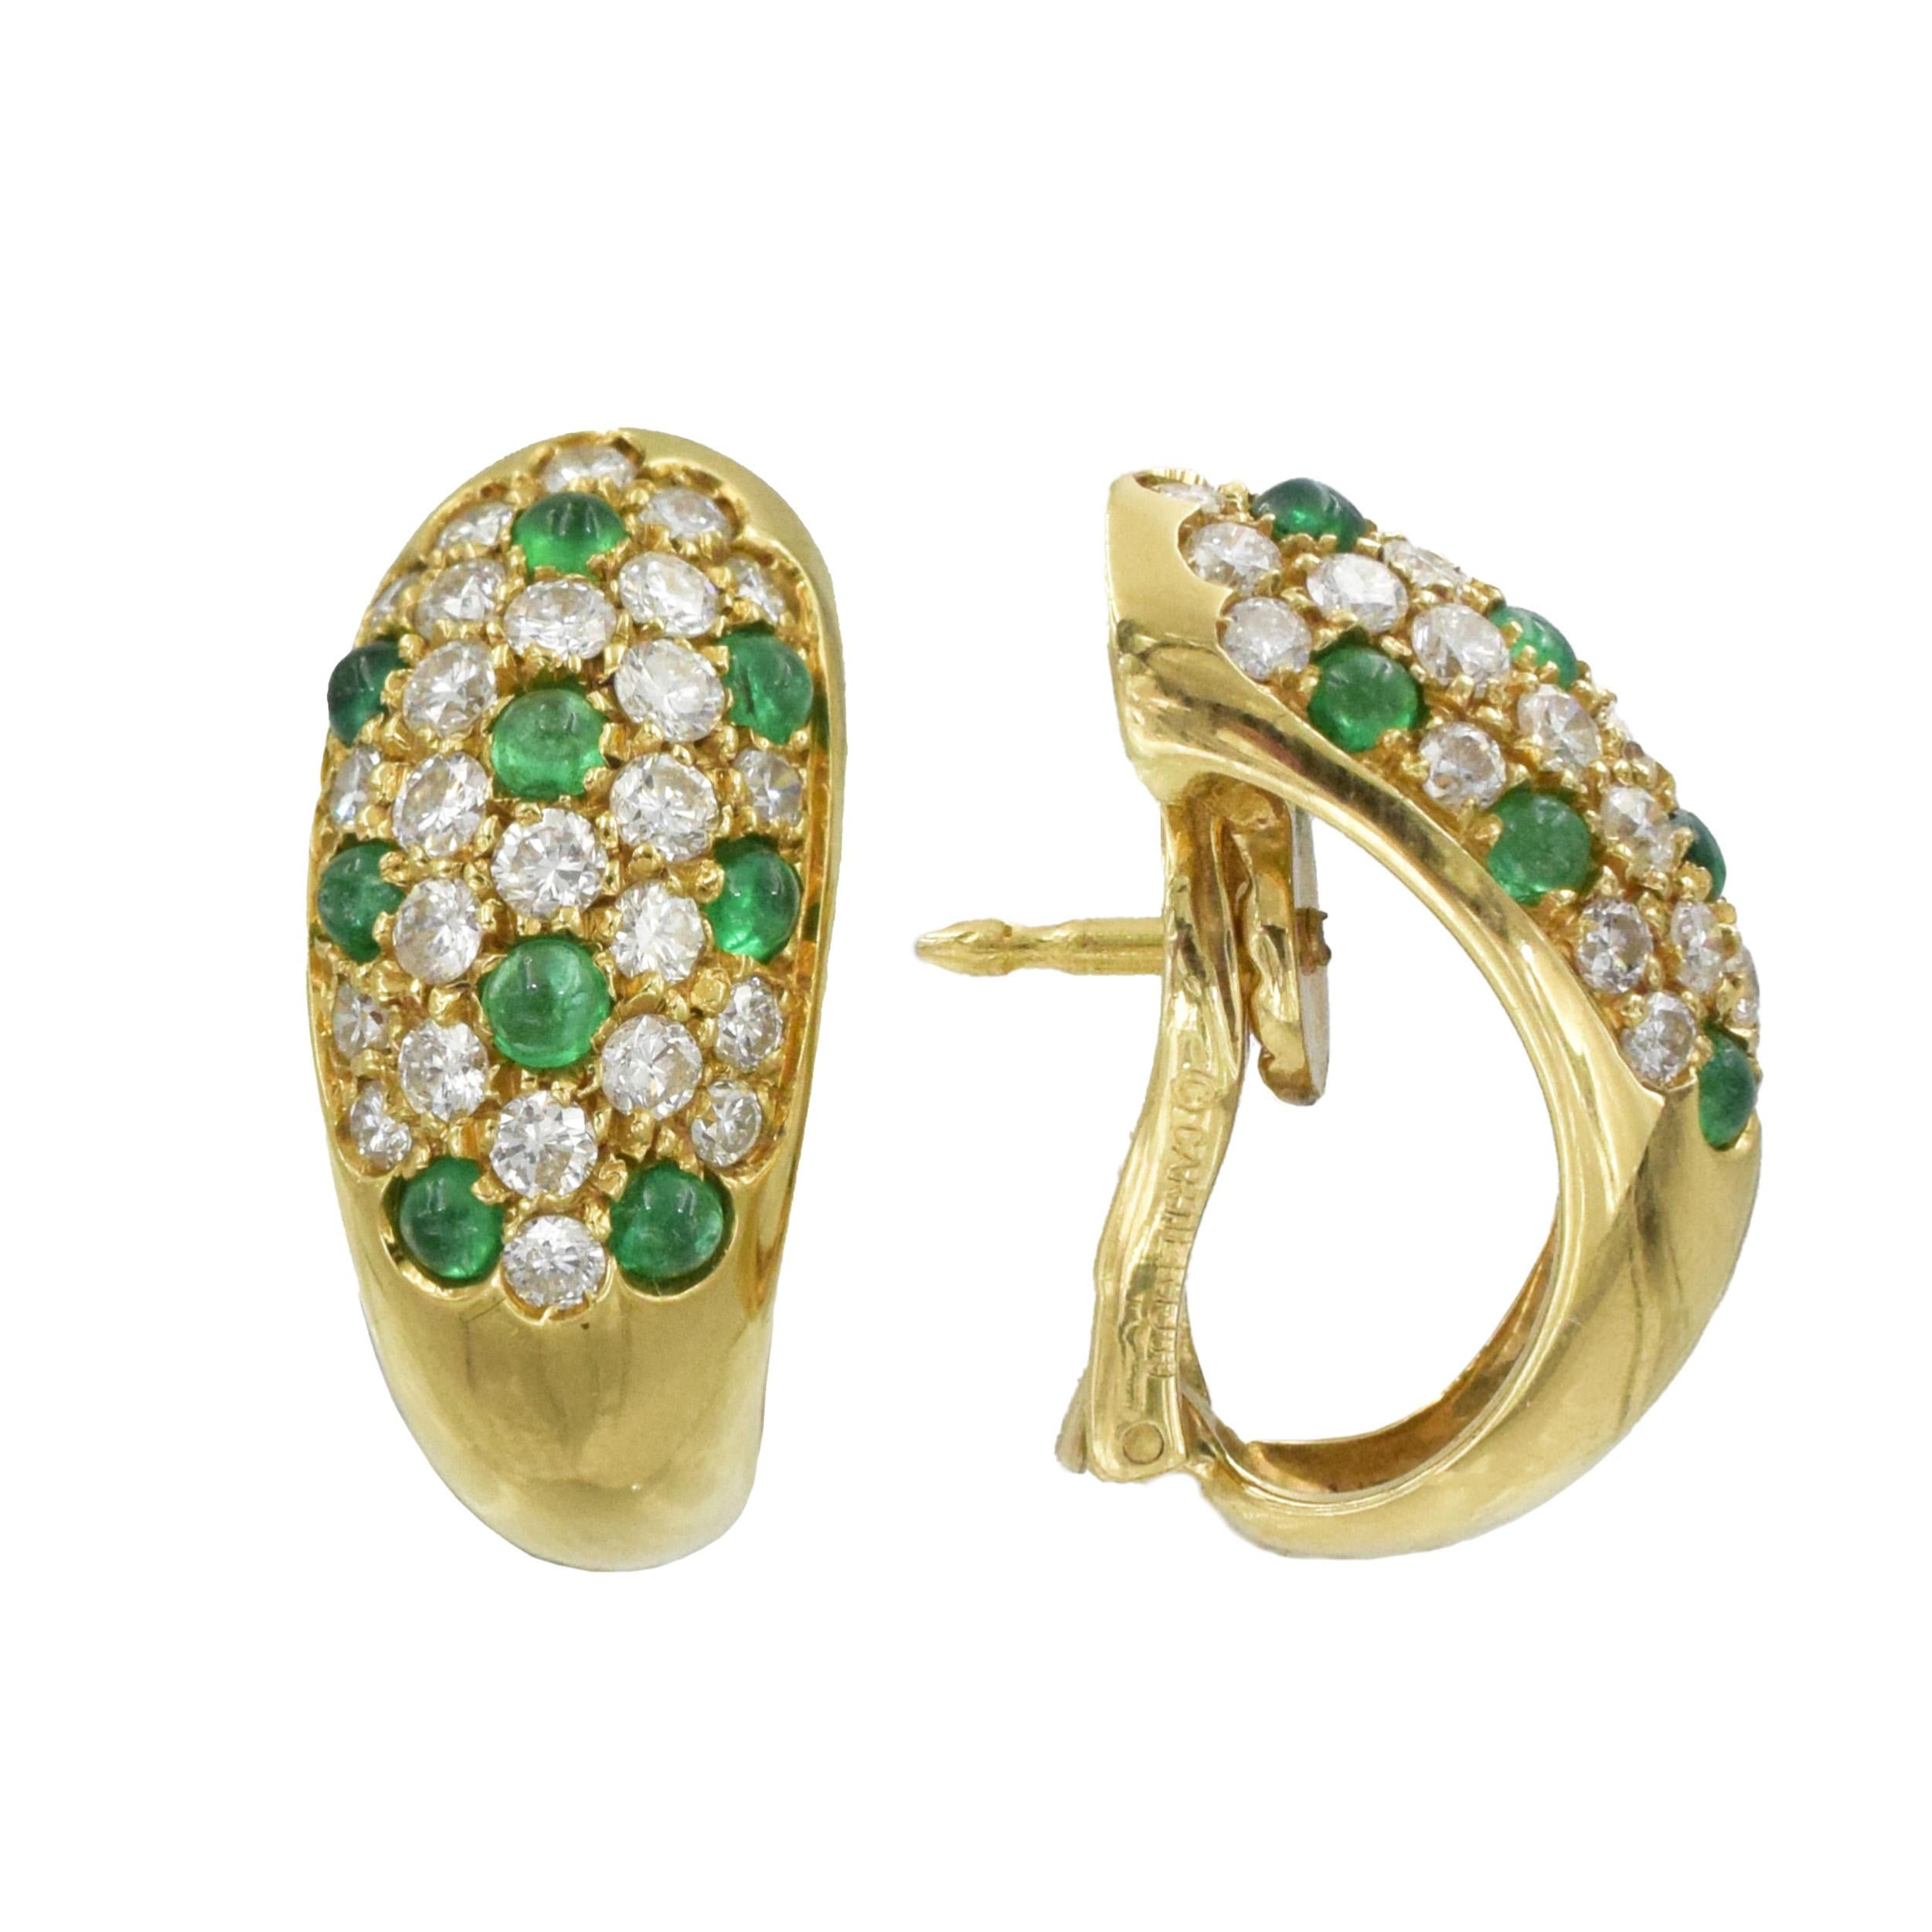 Women's Cartier Diamond and Emerald Earrings and Ring Set For Sale